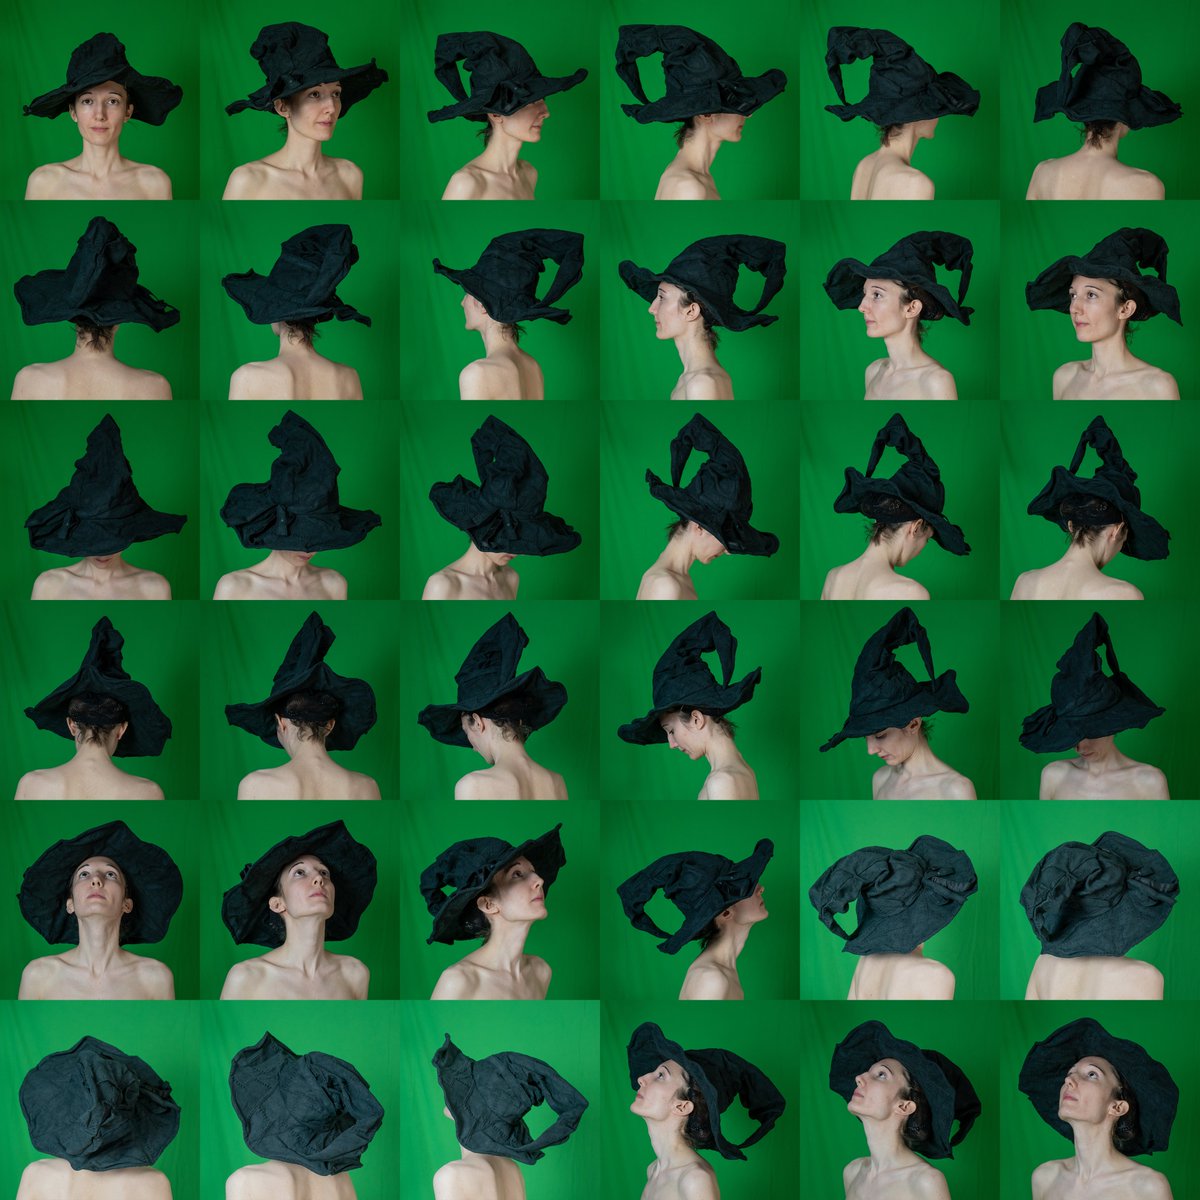 Jen / Jenny 🌛 on Twitter: "Here are my old witch hat references